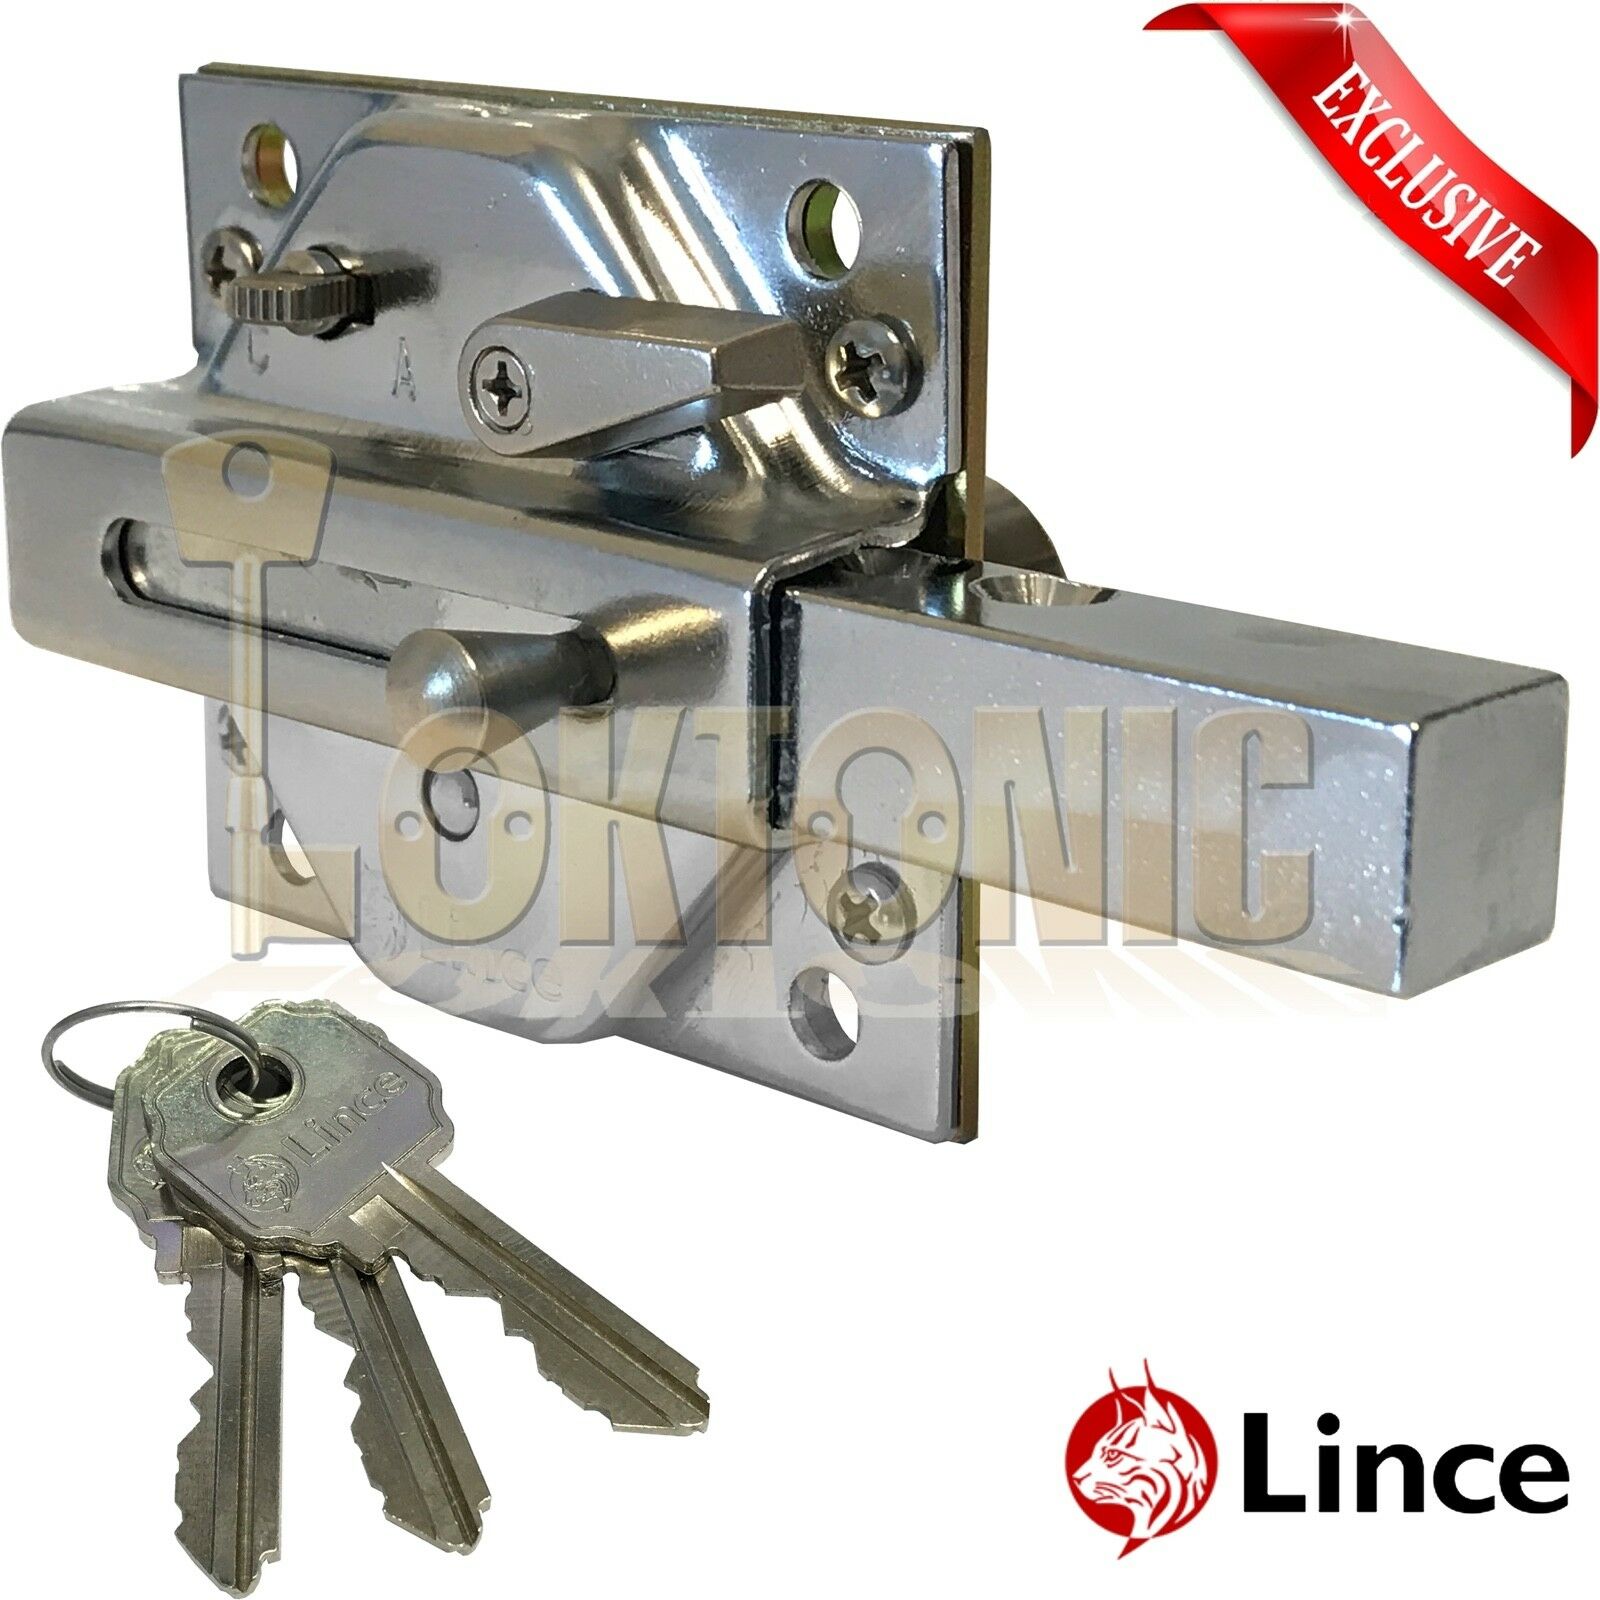 Details about   Lince Armour Plate High Security Heavy Duty Rim Gate Shed Sliding Dead Bolt 